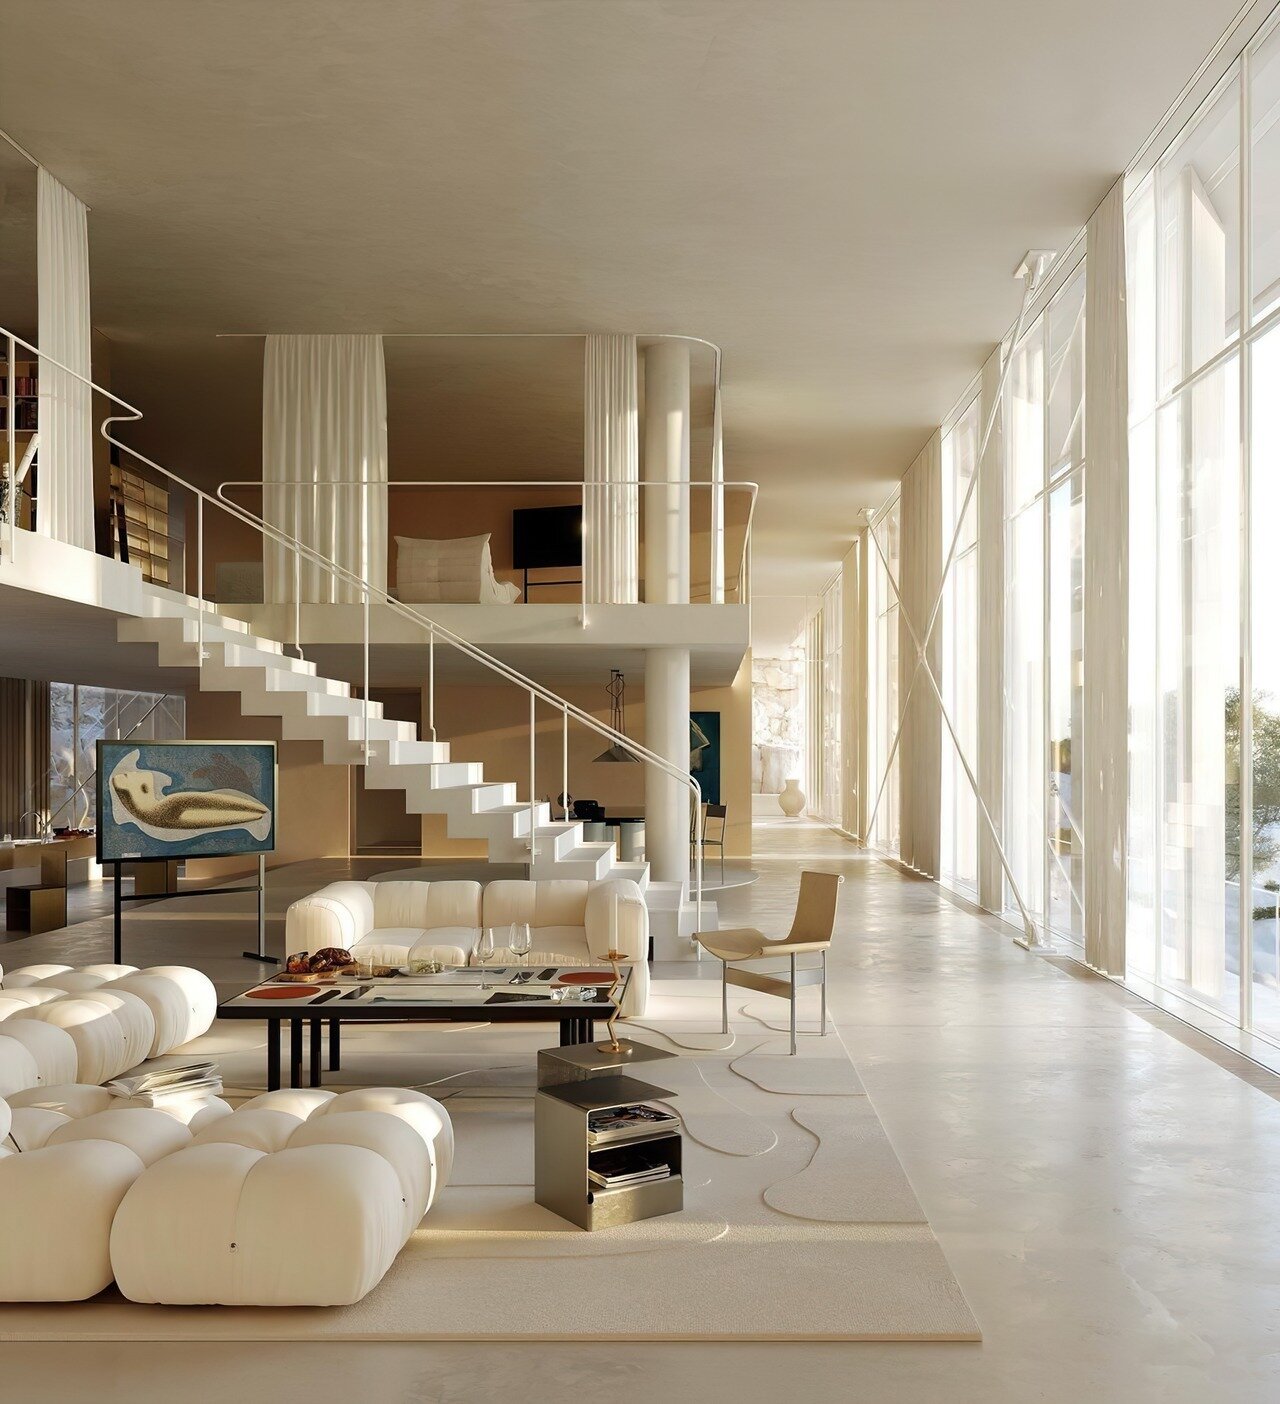 This inspirational, elegant lounge imagined by hyper-realistic rendering experts Charlotte Taylor (of Maison de Sable) and Nicholas Pr&eacute;aud (of Ni.acki). This spacious residence, meanwhile, is the Villa del Soffio, an Italian, modernist seafron